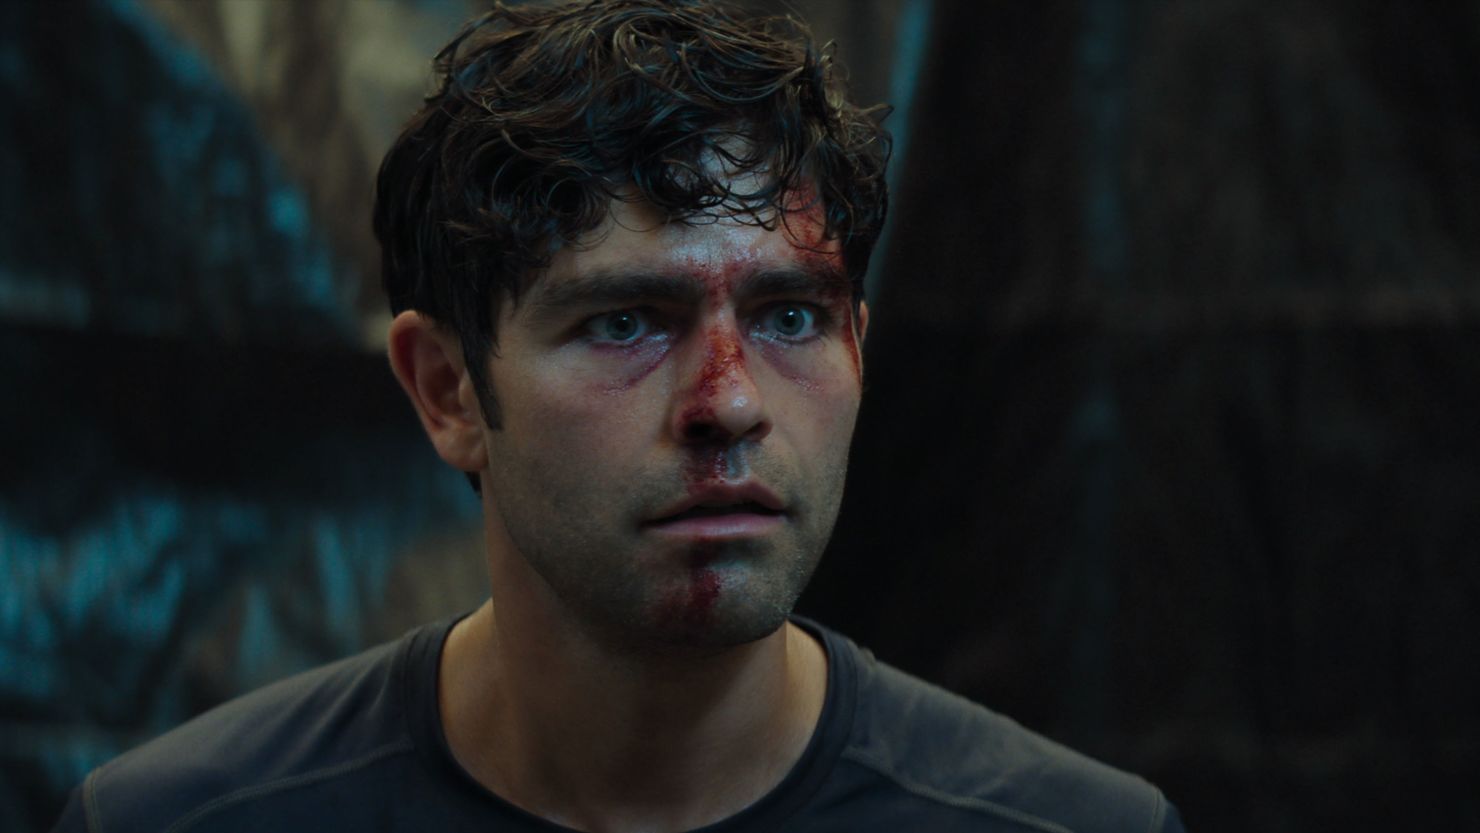 Adrian Grenier stars as an abducted family man in "Clickbait."